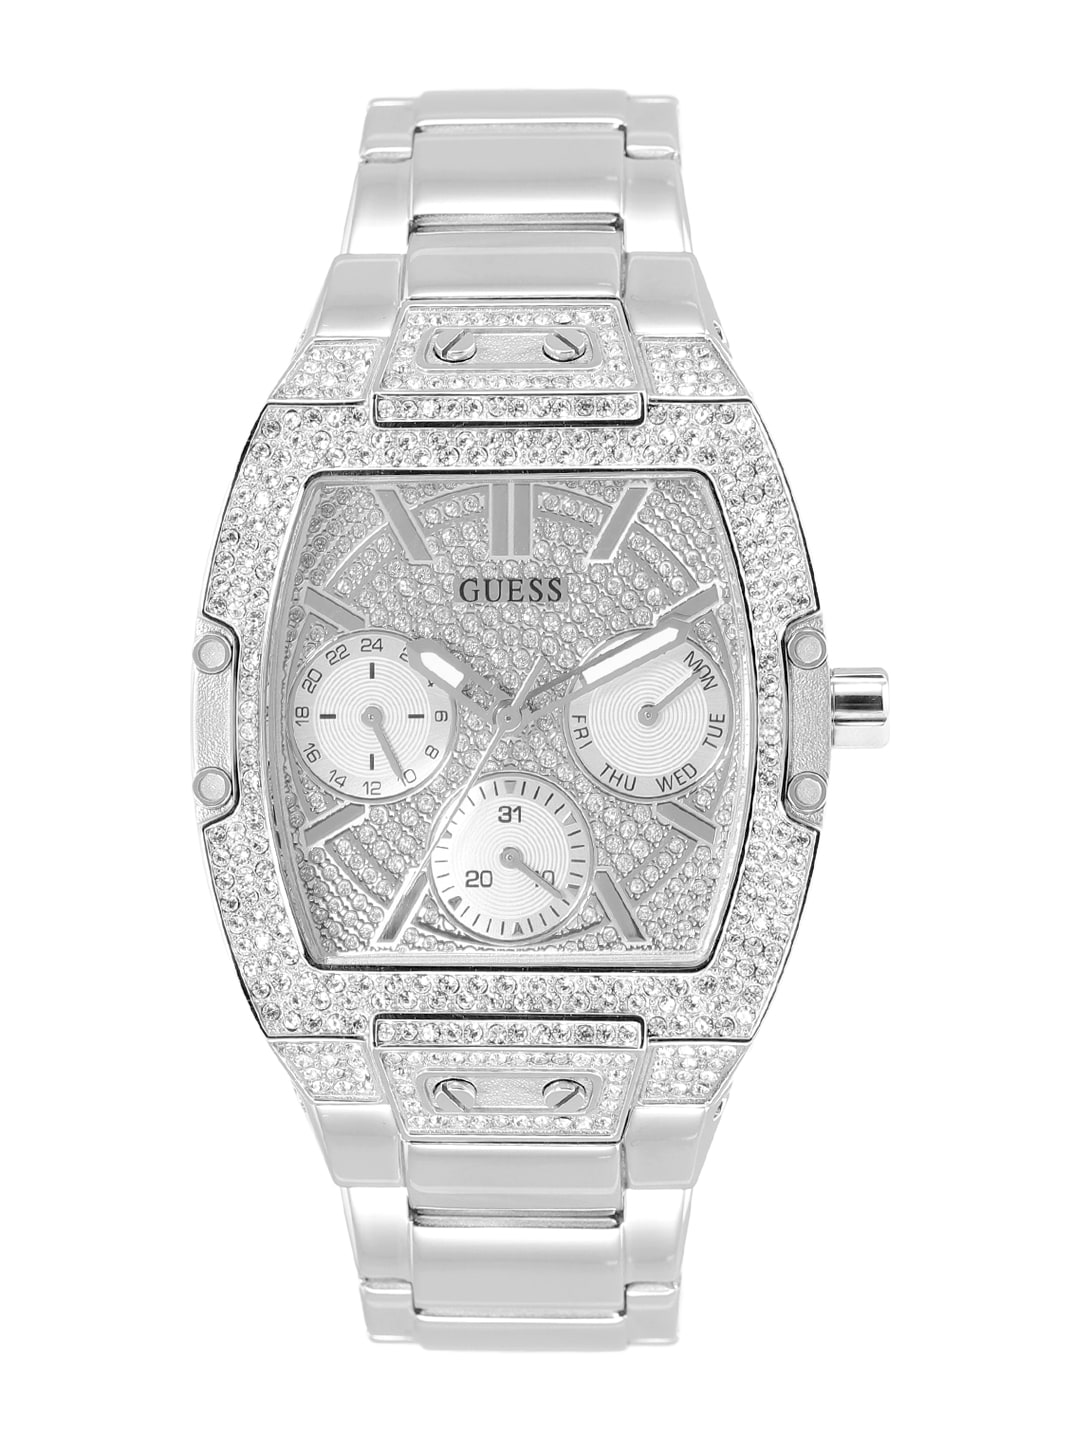 GUESS Women Silver-Toned Embellished Dial & Bracelet Style Straps Analogue Watch GW0104L1 Price in India